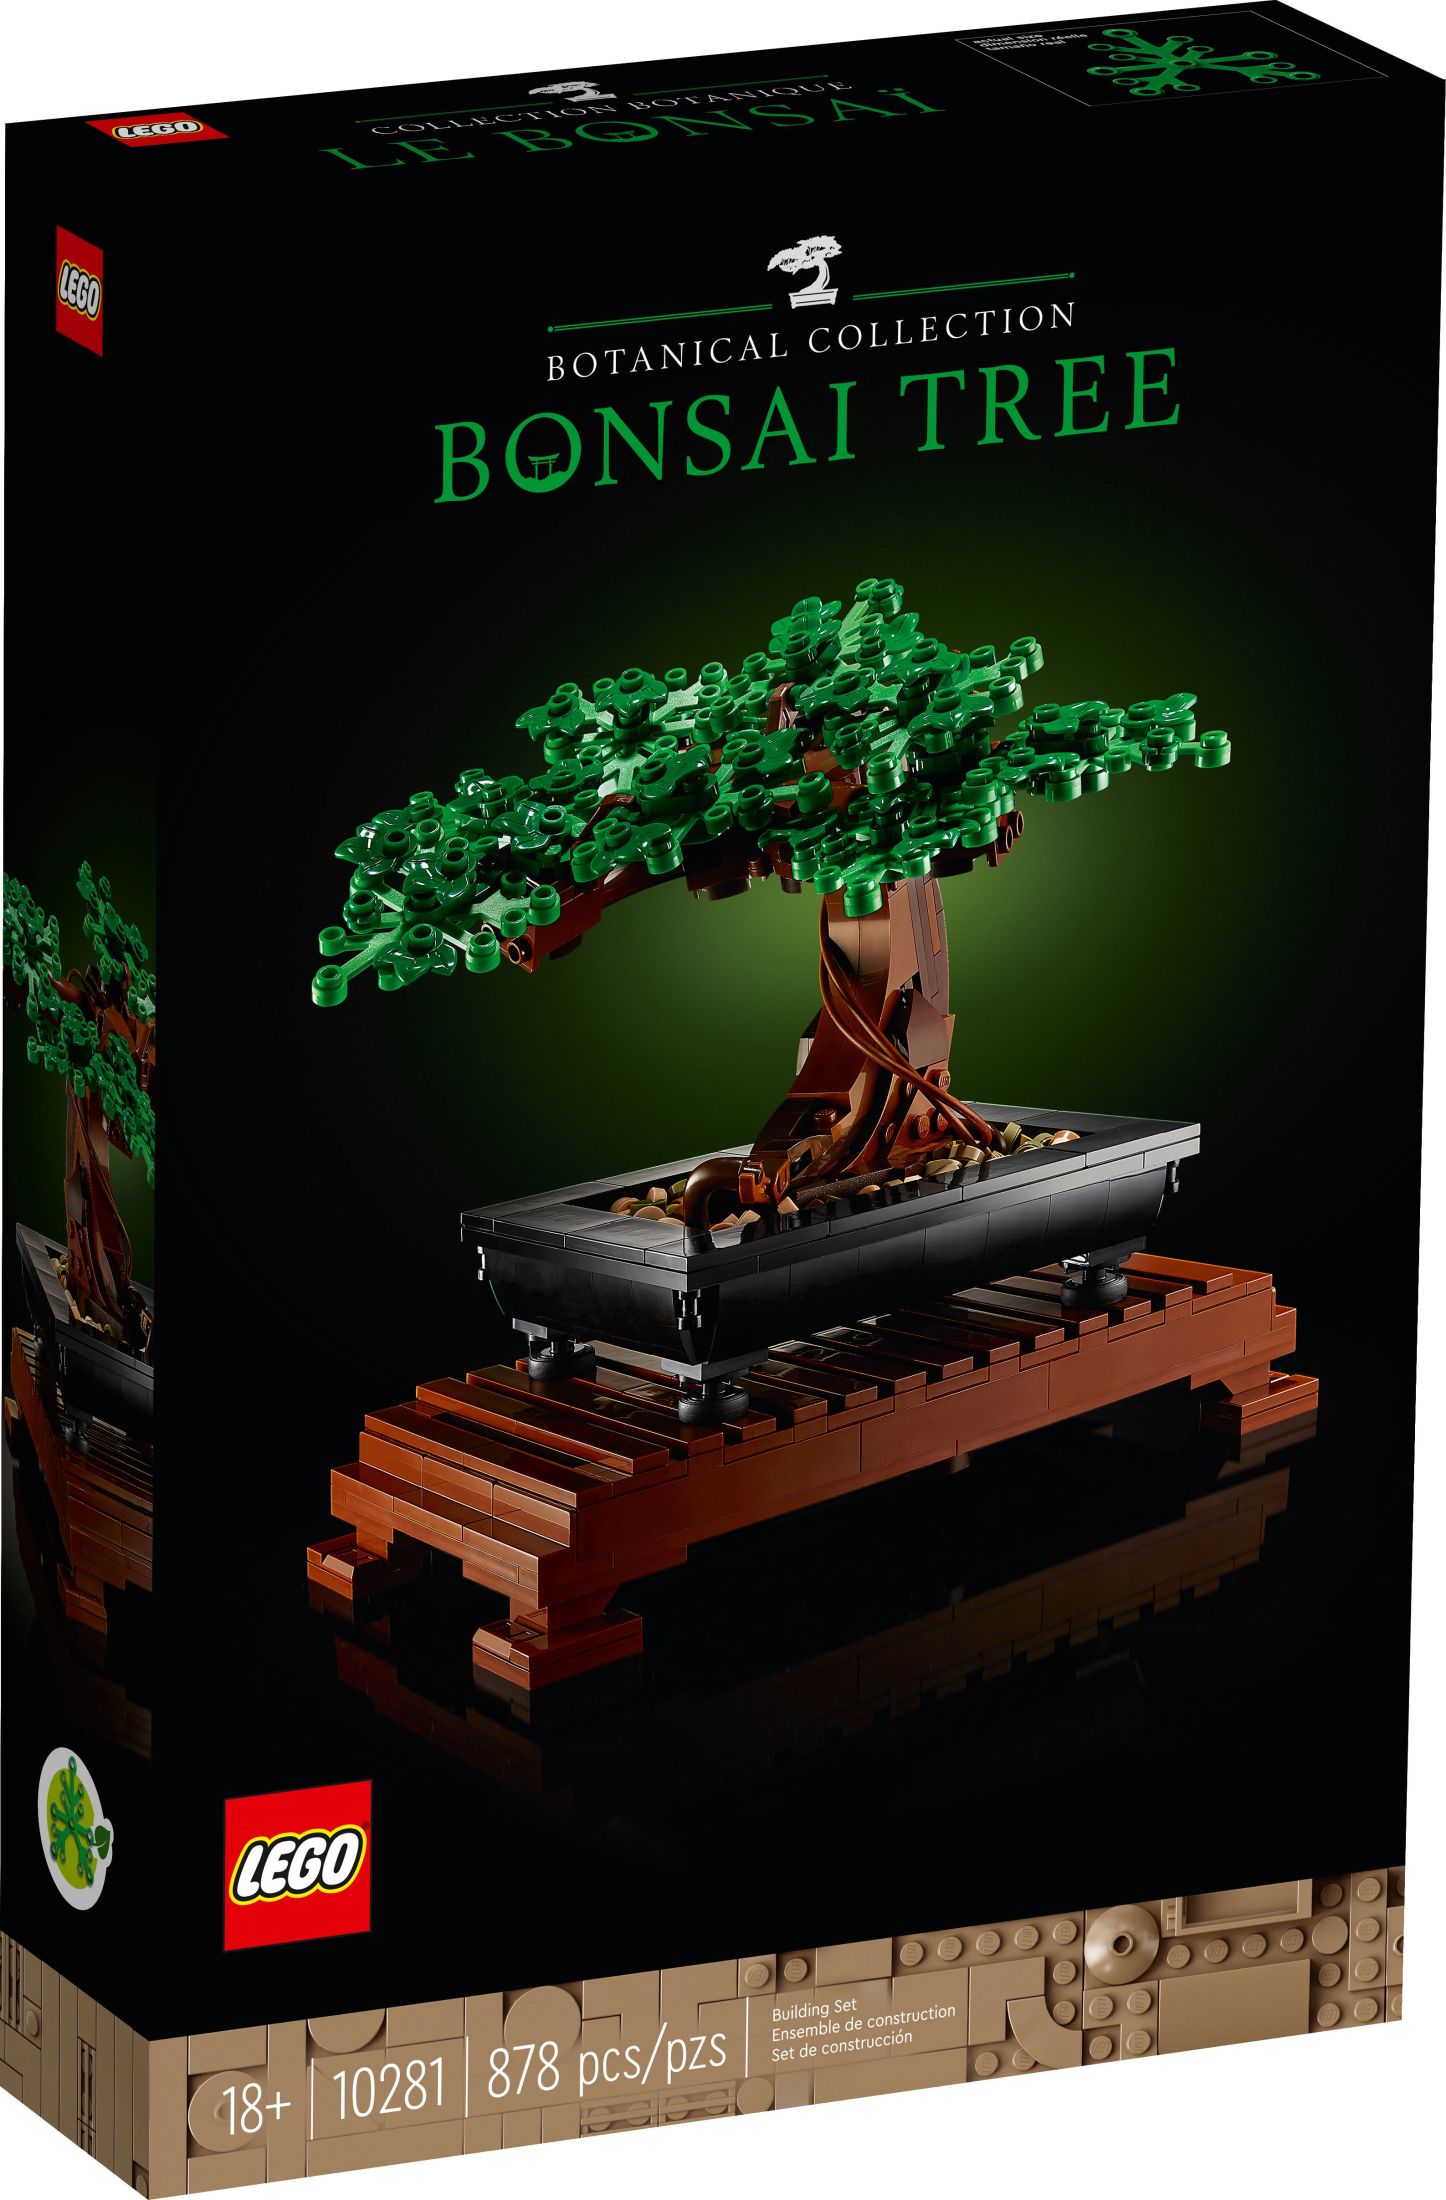 LEGO Icons Bonsai Tree Building Set, Features Cherry Blossom Flowers, Adult DIY Plant Model, Creative Gift for Home Décor, Office Art or Mother's Day Decoration, Botanical Collection Design Kit, 10281 - image 4 of 9